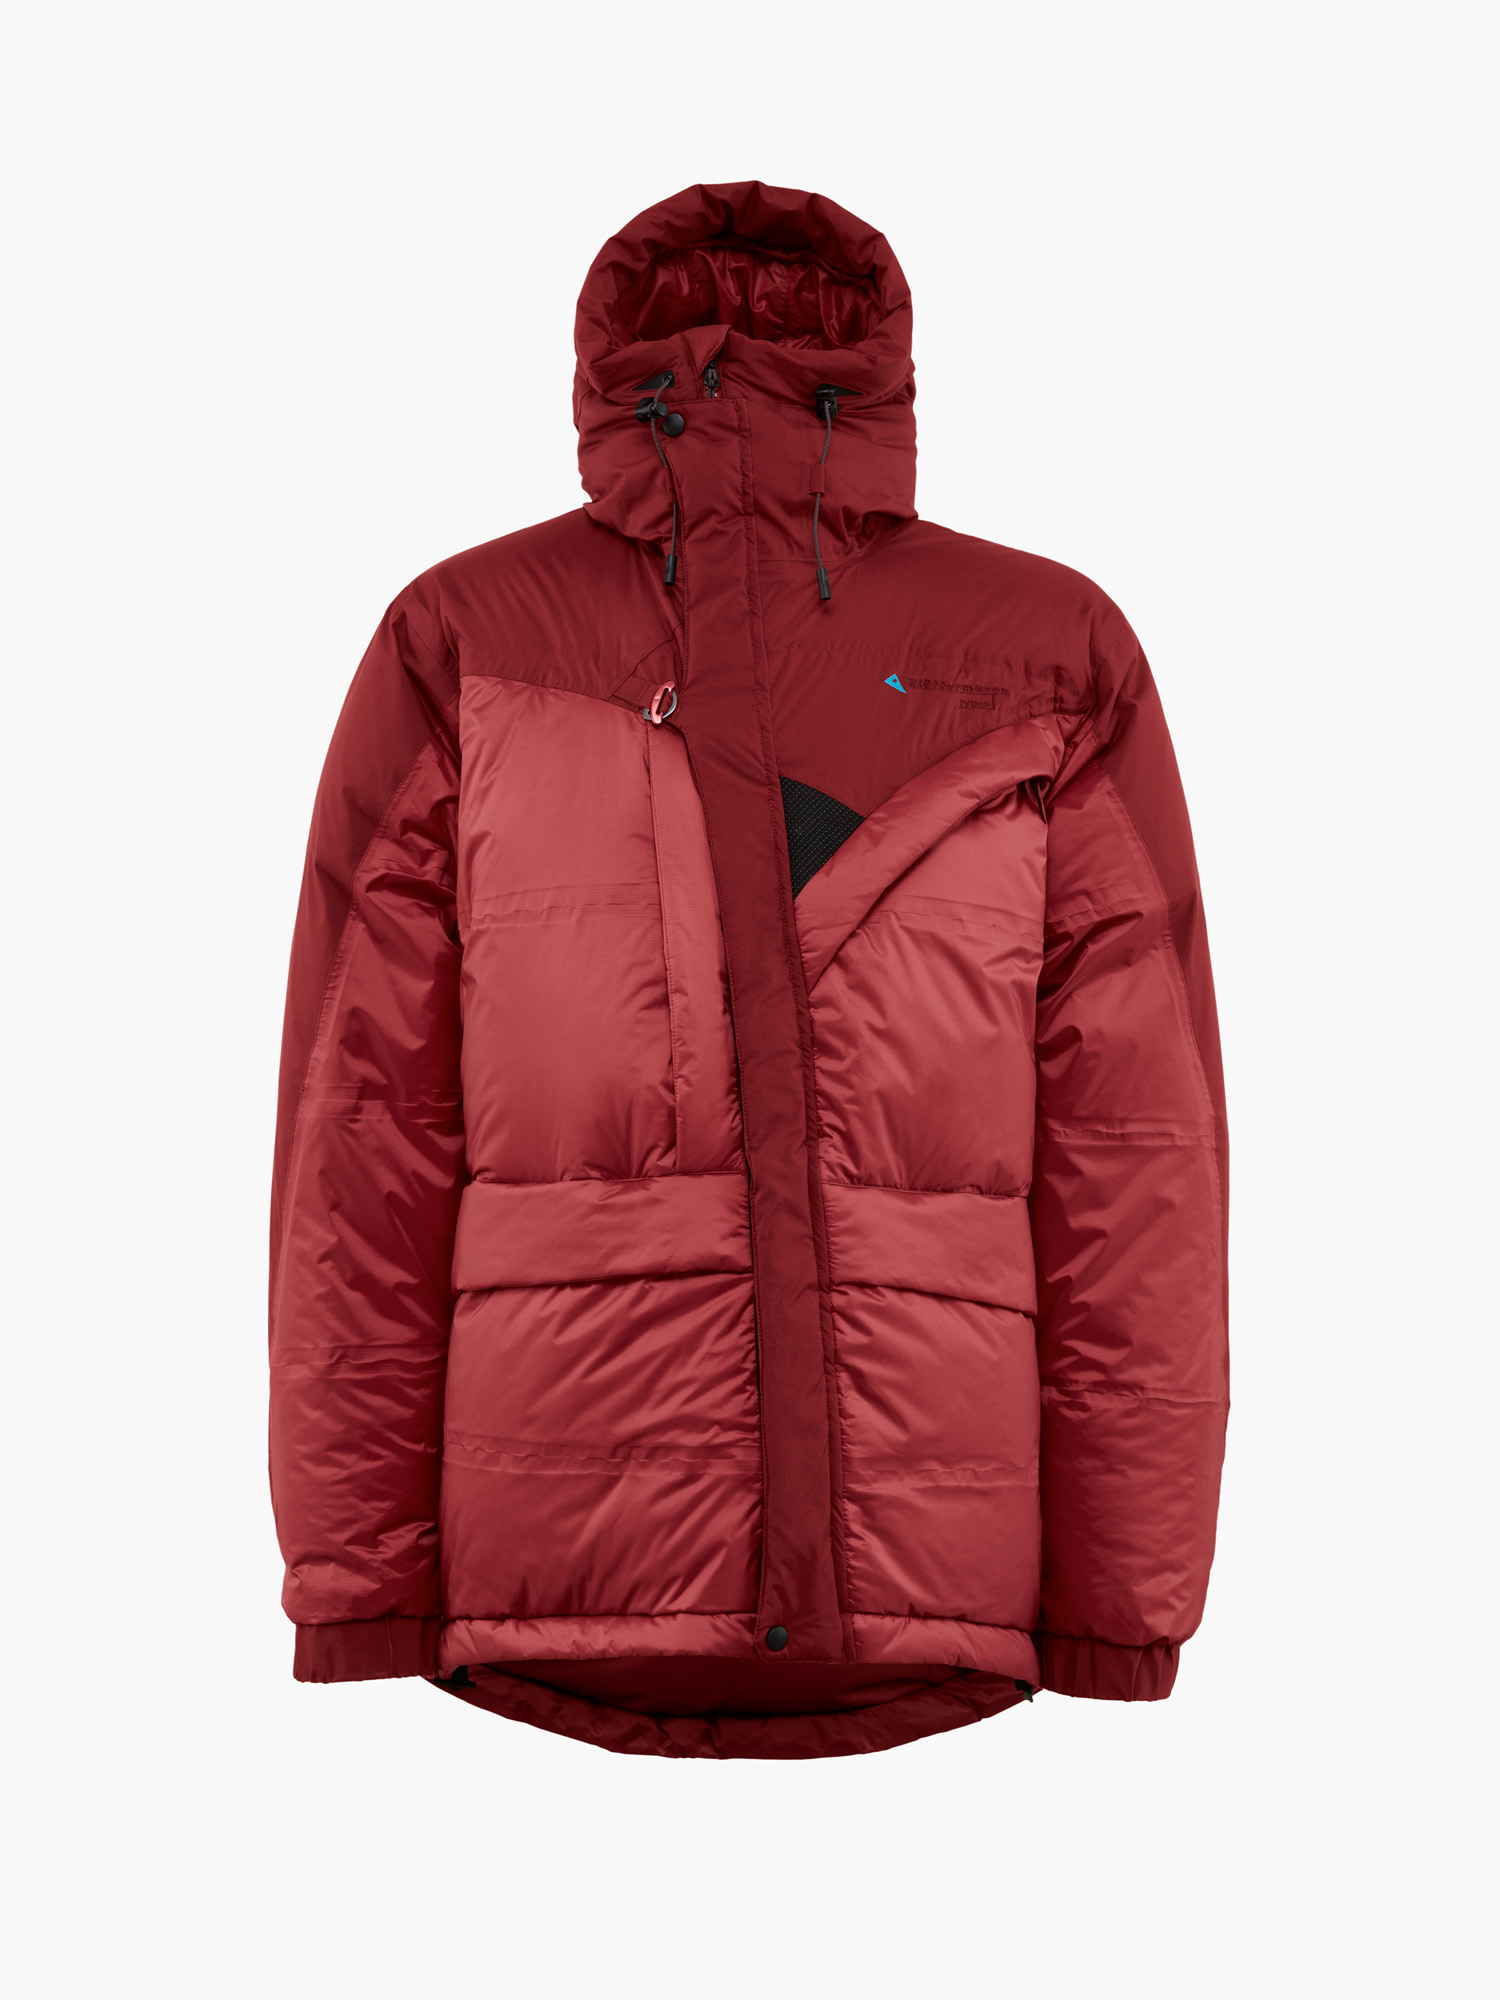 Iving 2.0, red down expedition jacket with down-filled hood.